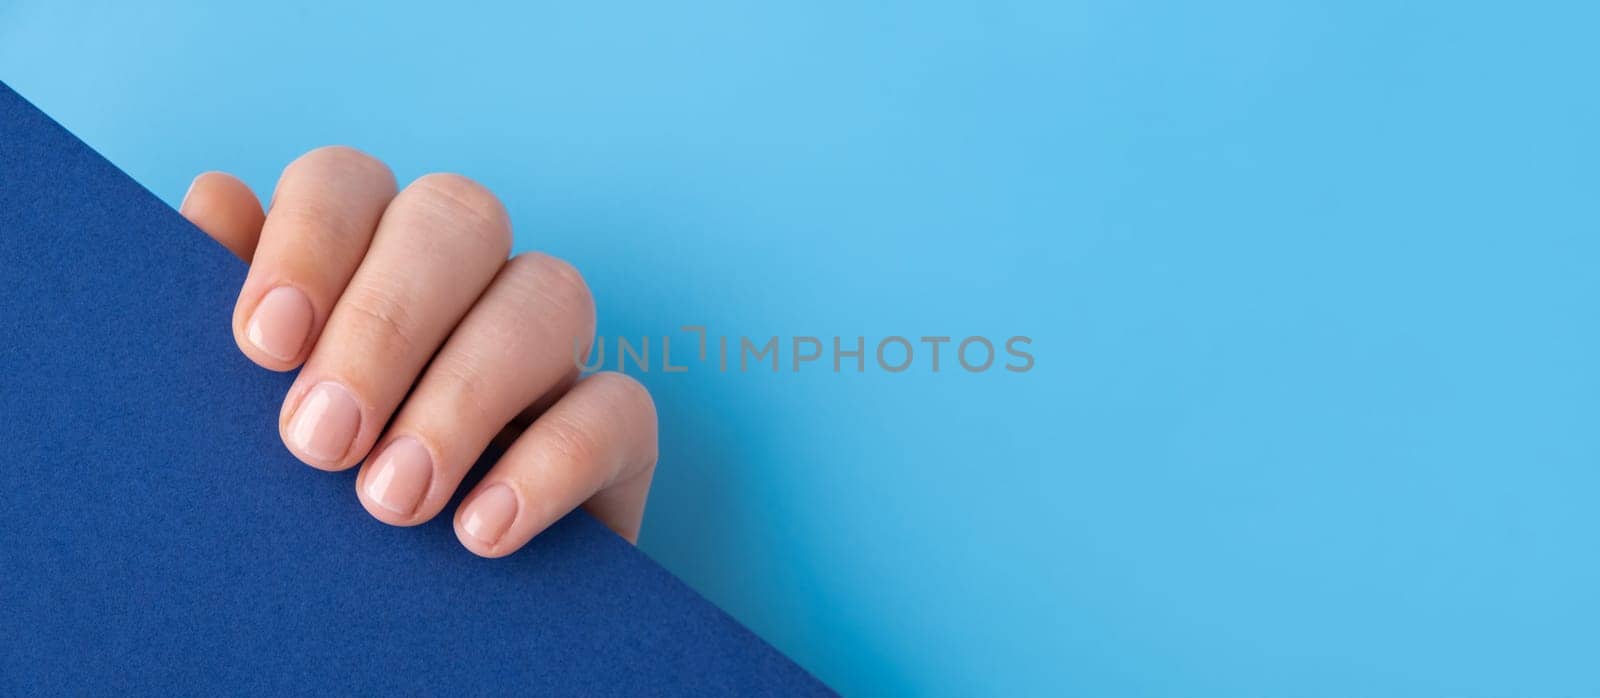 Pastel softness manicured nails on blue background. Mock up template copy space Woman showing her new manicure in colors of pastel palette. Simplicity decor fresh spring vibes earth-colored neutral tones design